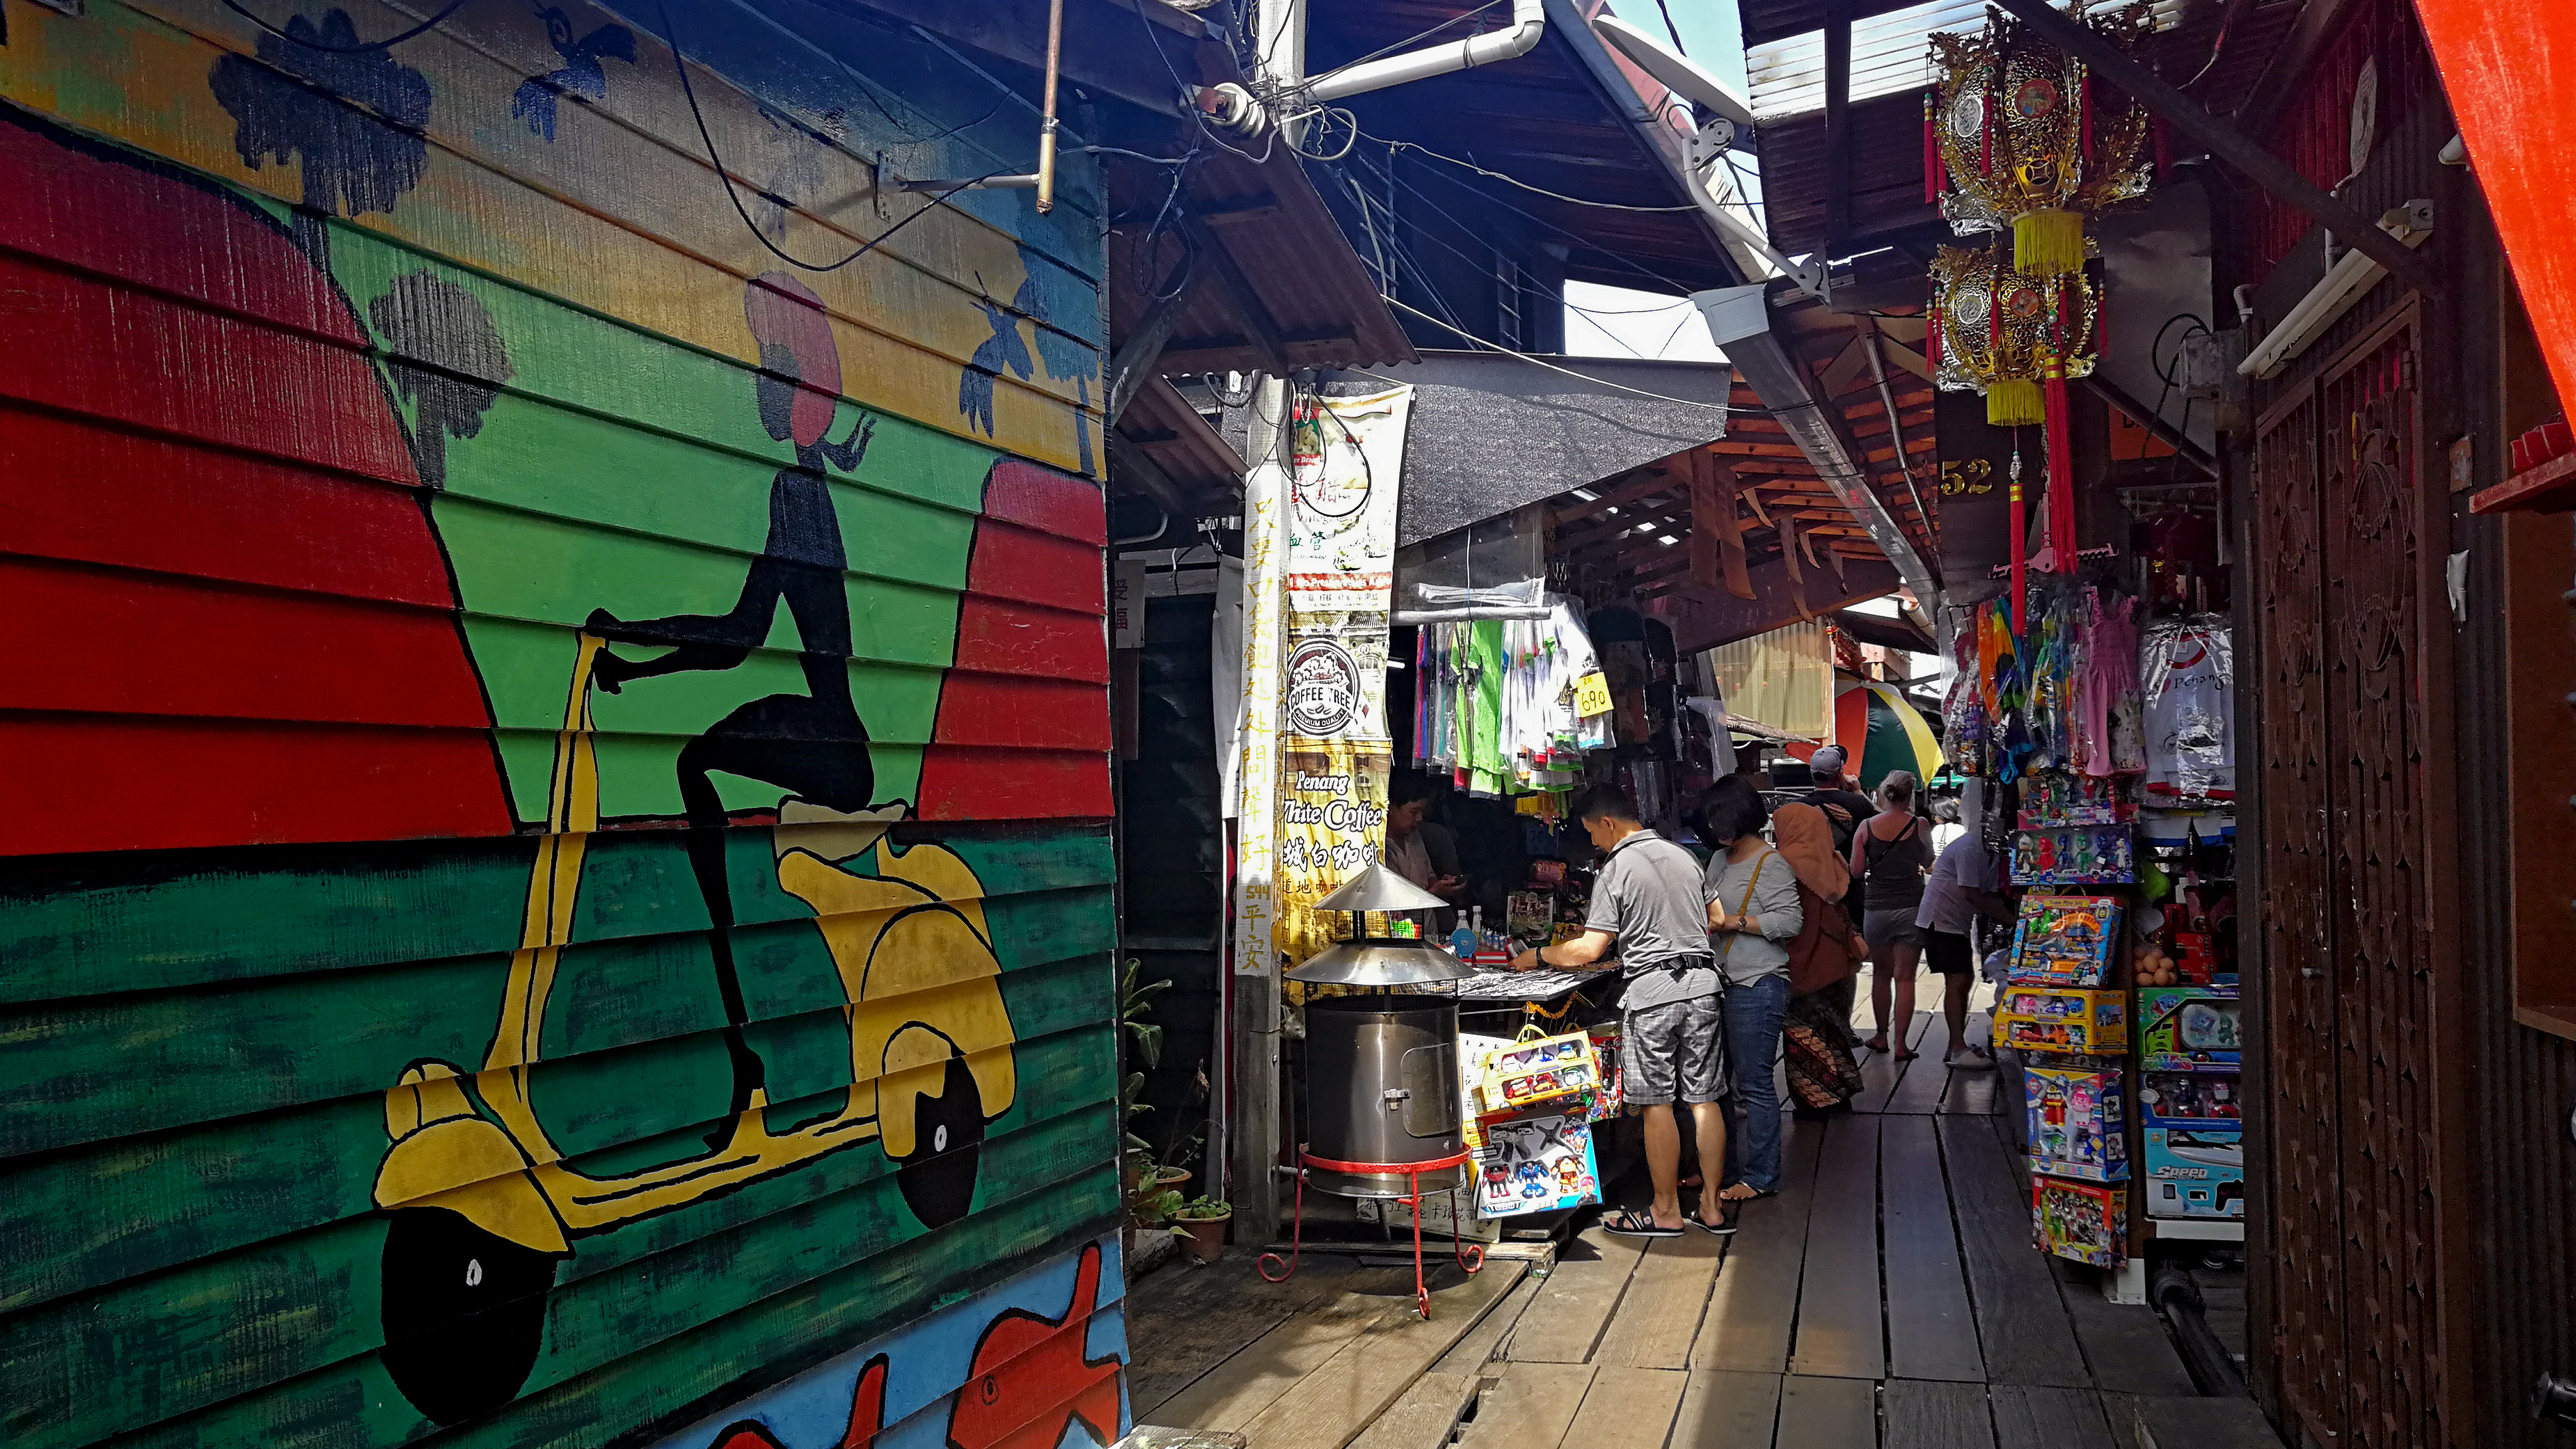 The Chew Jetty is the most tourist-friendly, with the longest walkway, pop-up stalls and a floating temple. But note that the jetties are still homes, so respect the residents’ privacy. Photo by Alexandra Wong